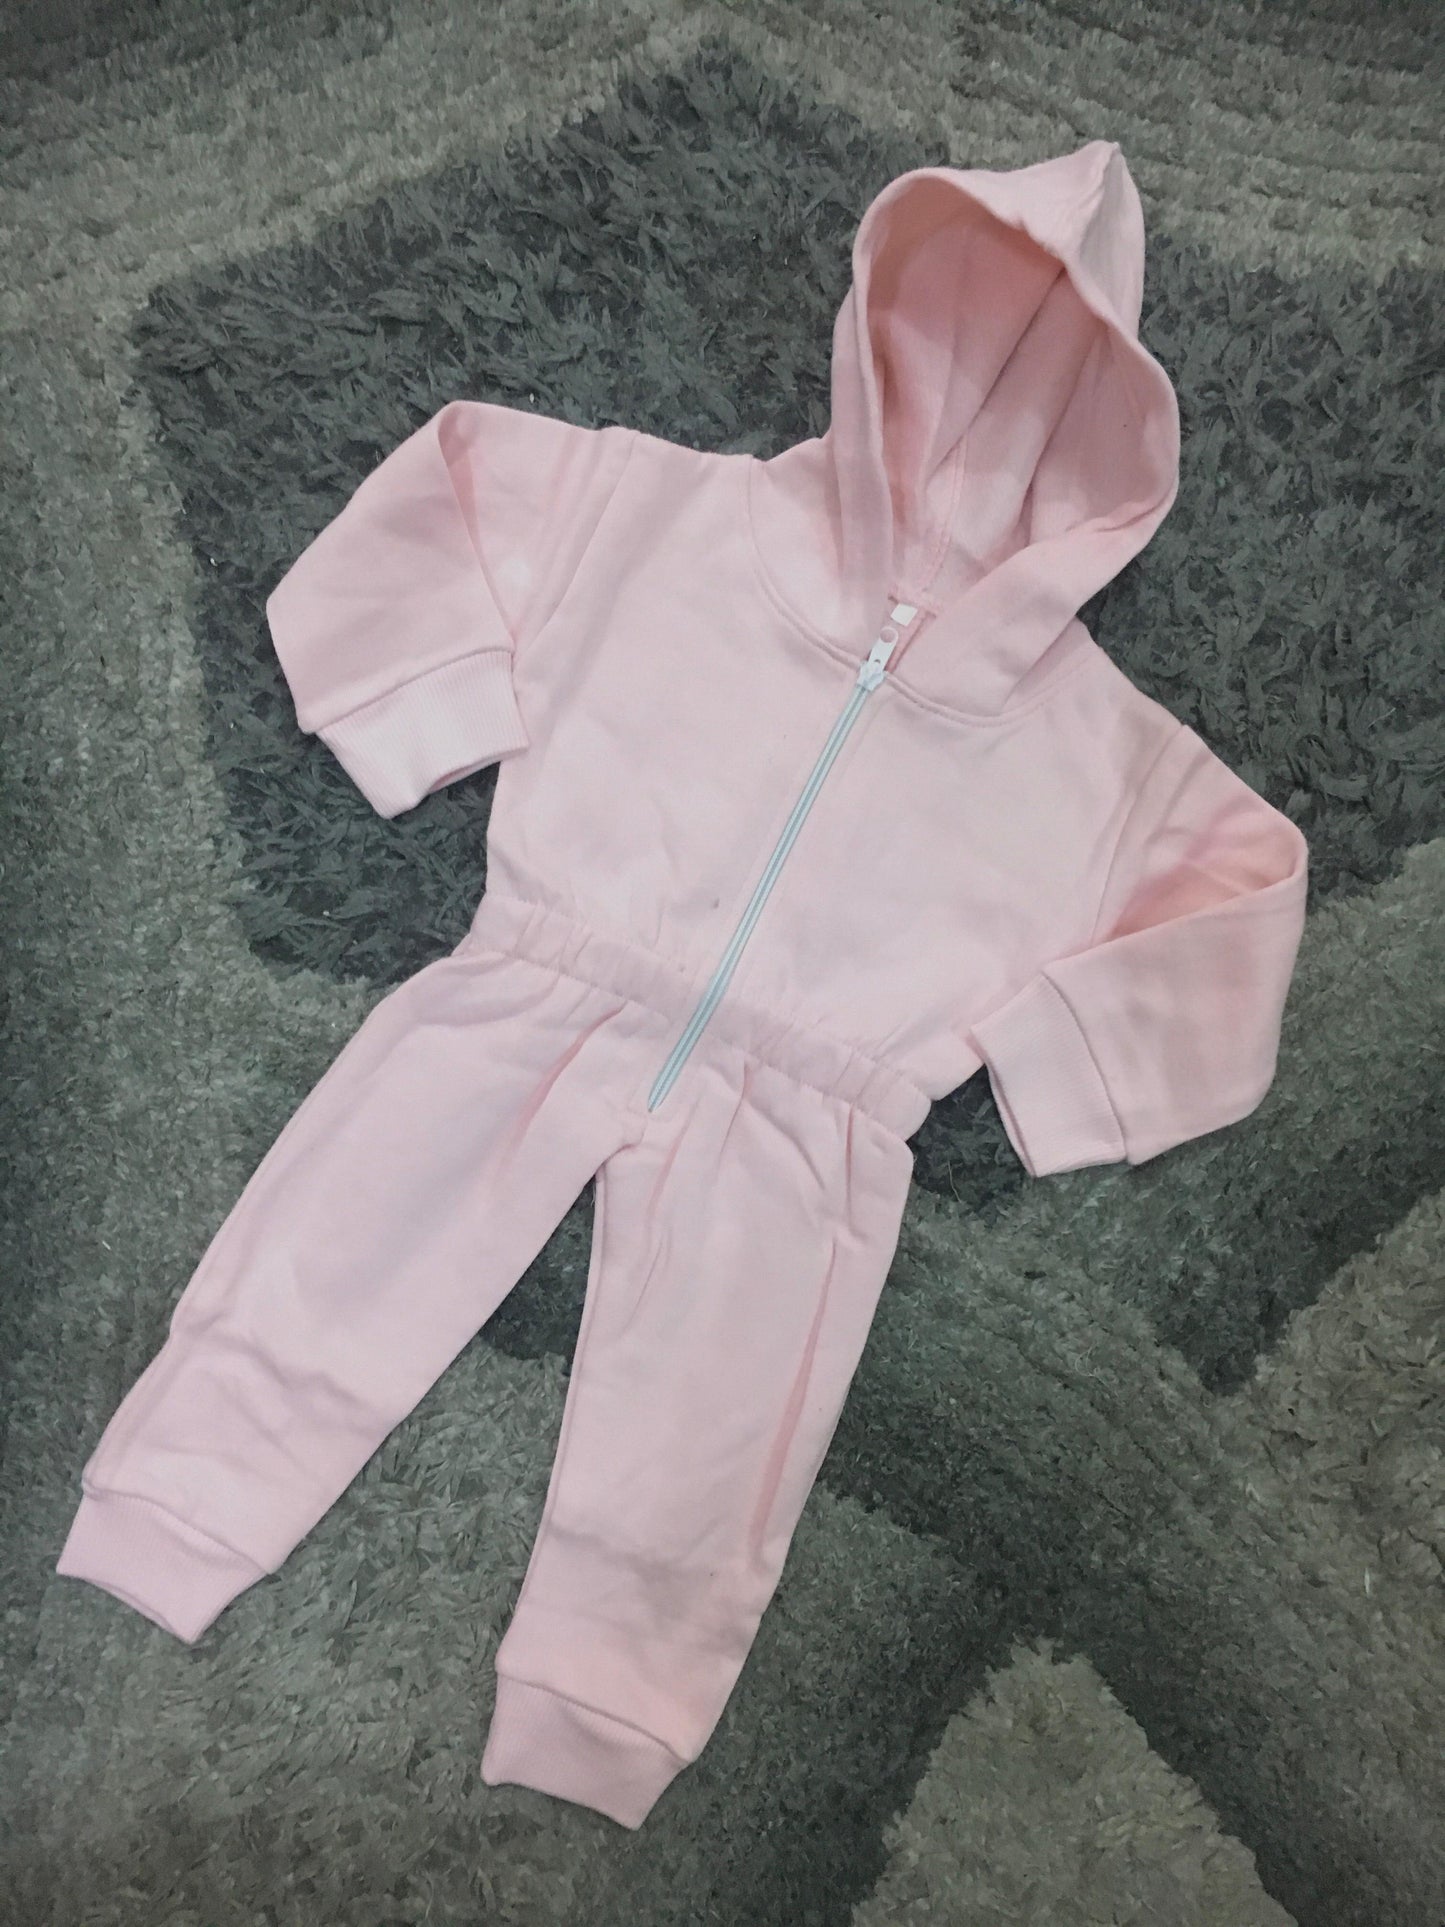 Kids Boys Girls Light Fleece Imported Rompers with Hoodie full Length with Pockets Winter Gala Pink